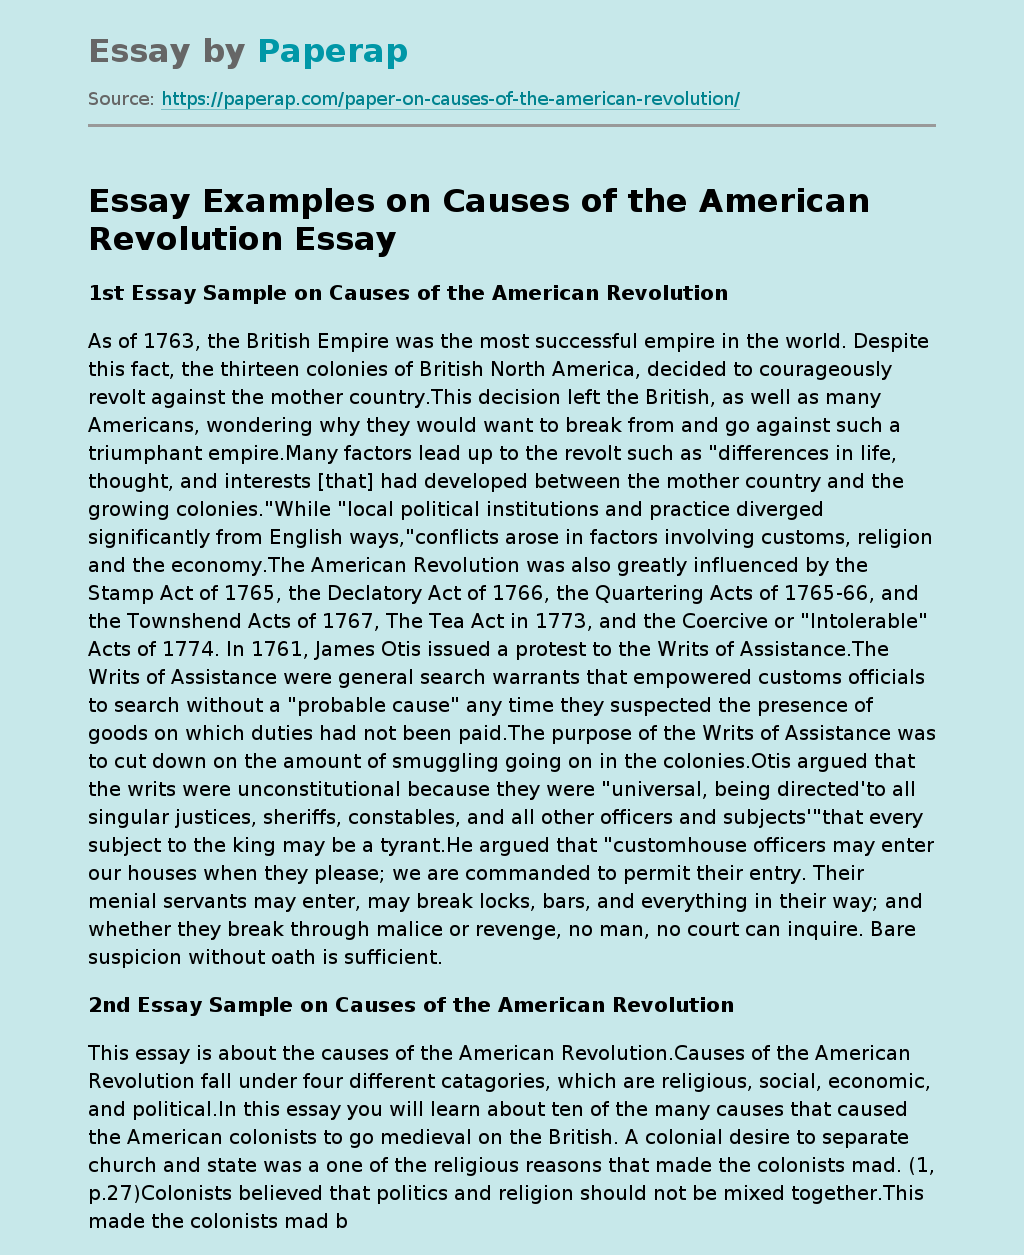 Essay Examples on Causes of the American Revolution